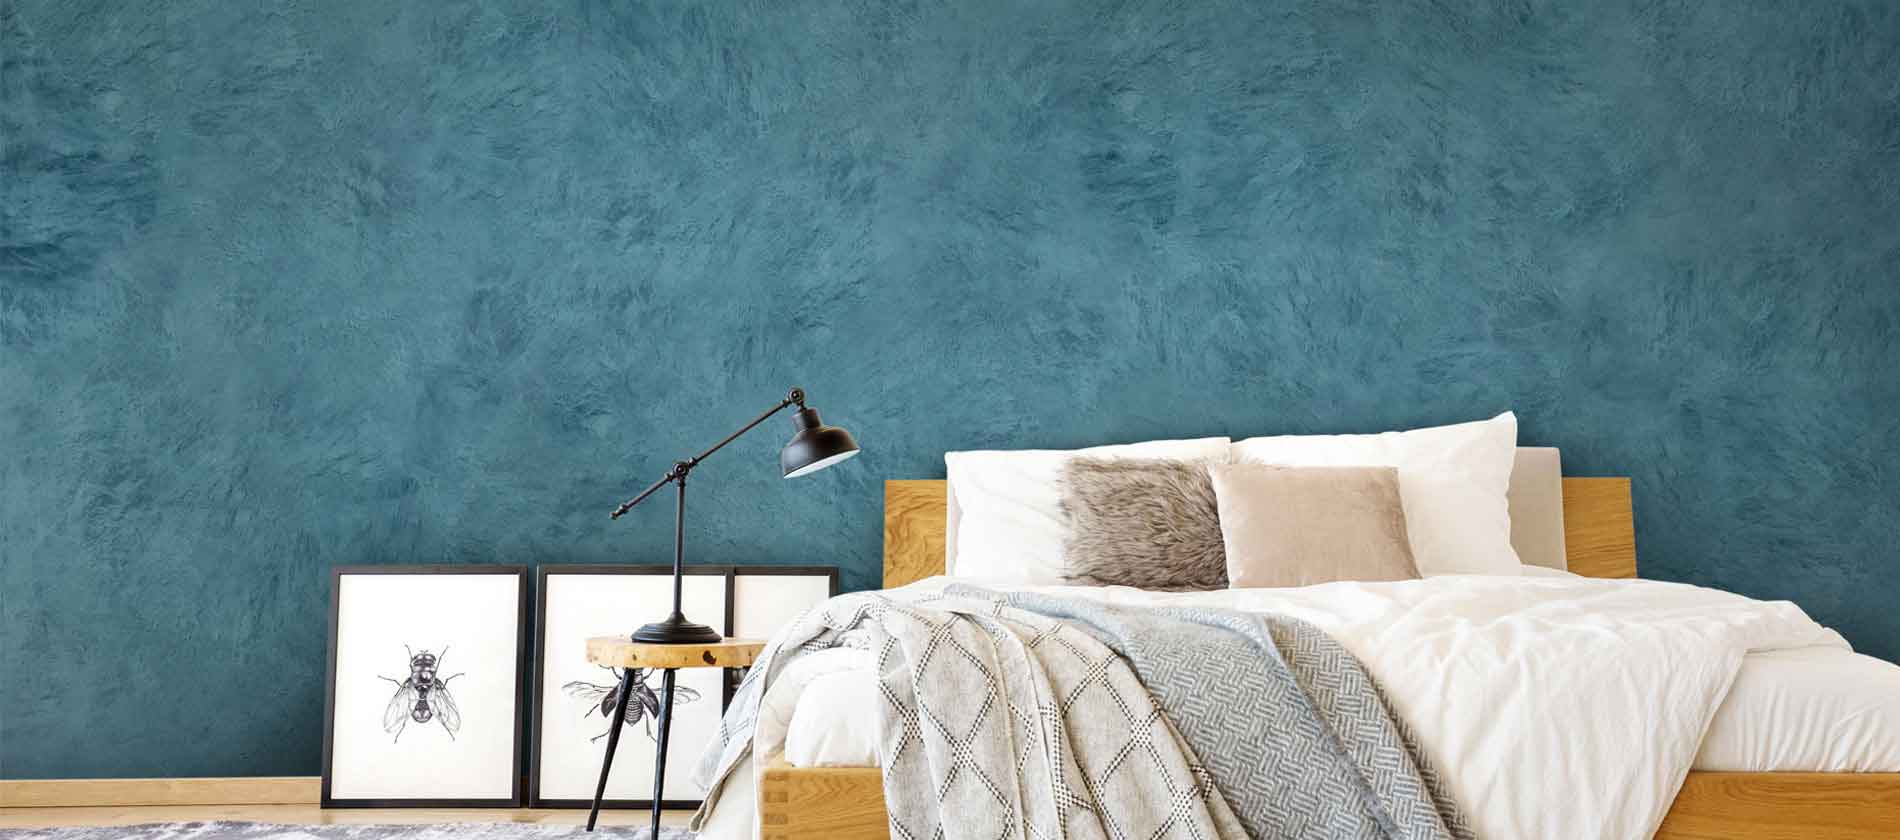 13 Wall Texture Designs for a Stylish Home Makeover